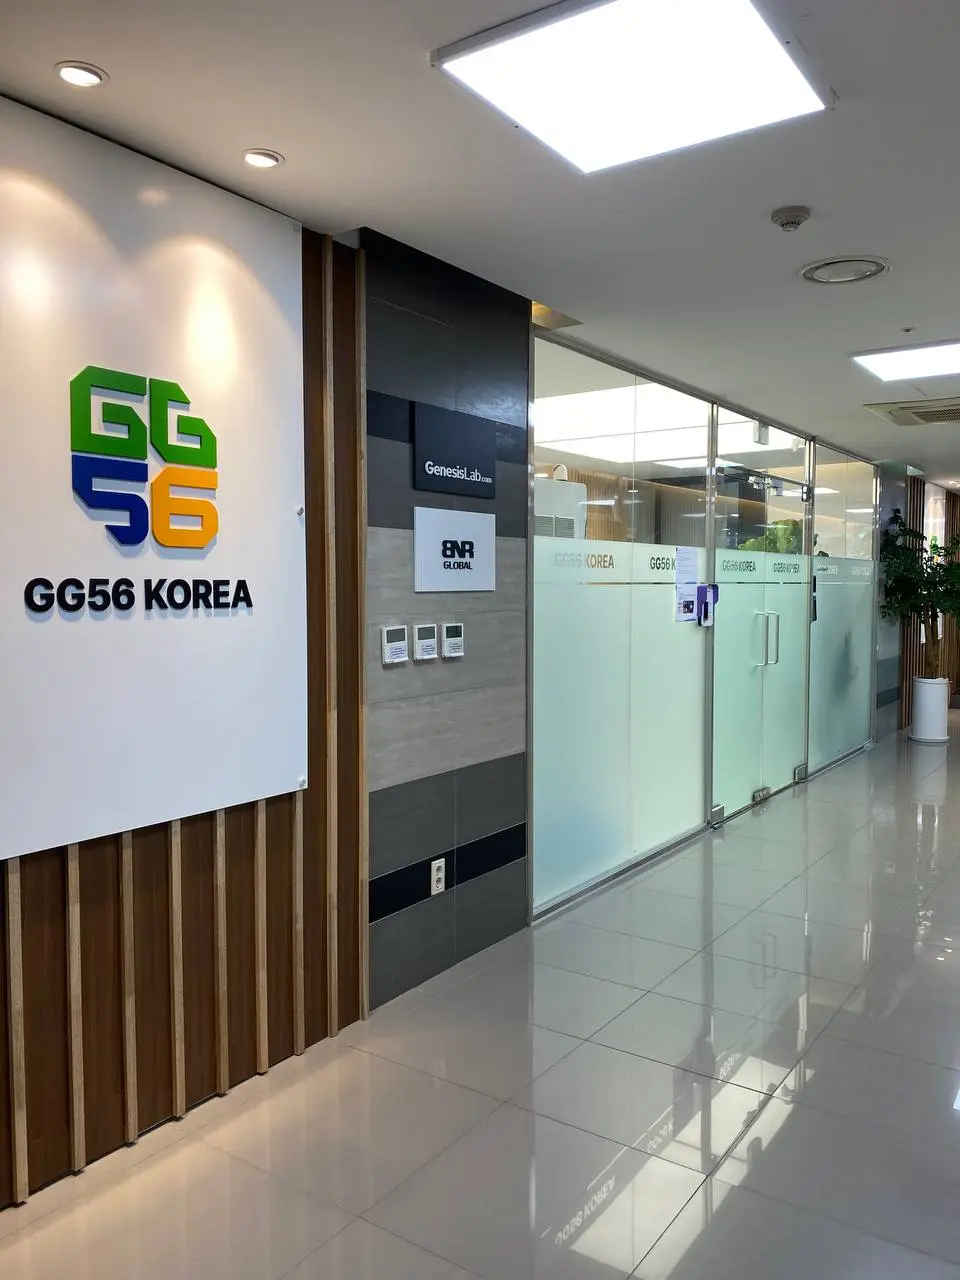 Entrance of GG56 lounge, located in the heart of Gangnam